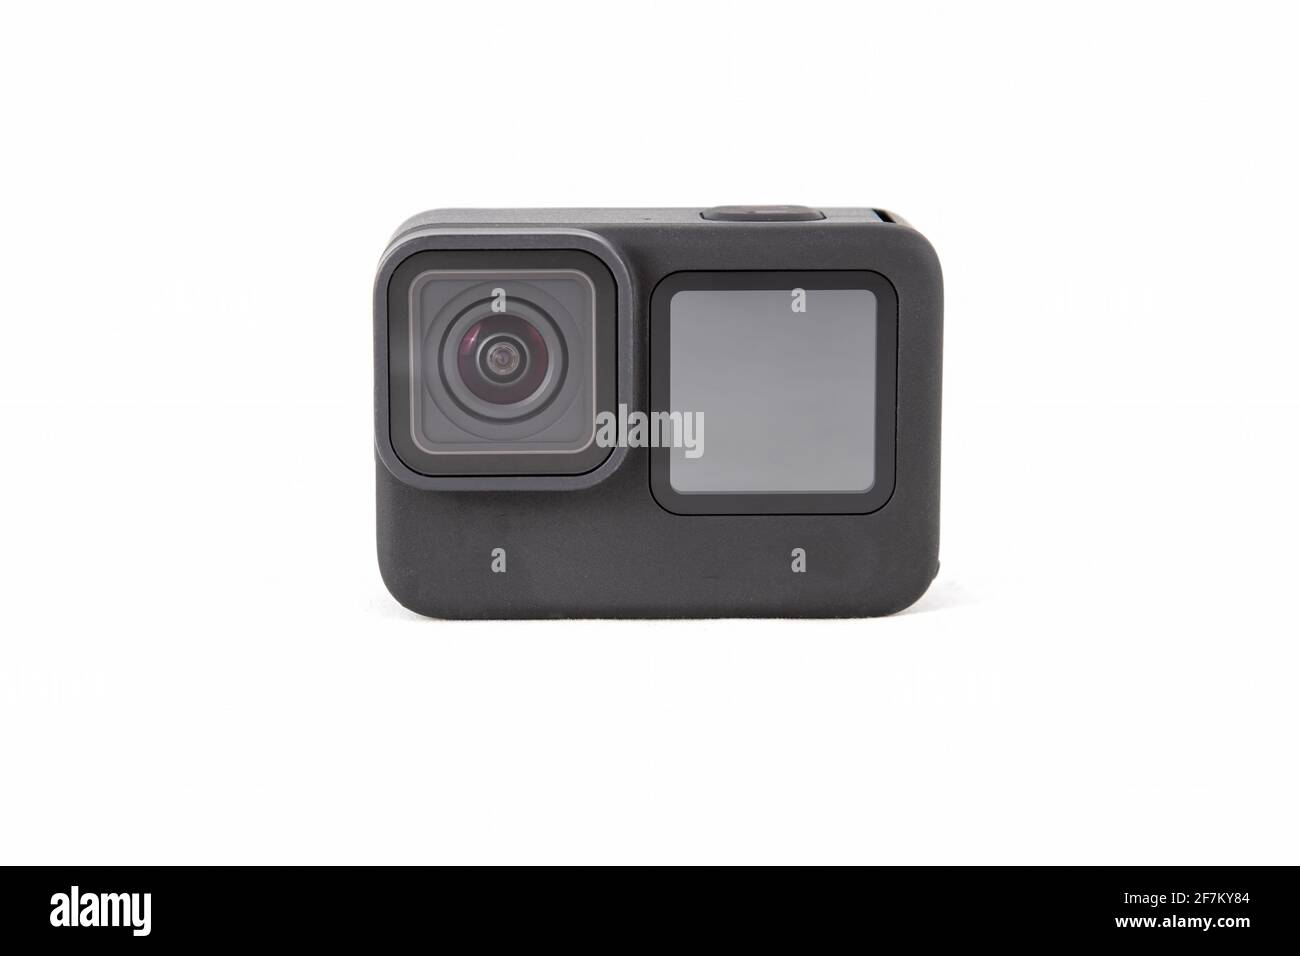 New 4K action camera in black color. Isolated white background.. fromt view. Stock Photo